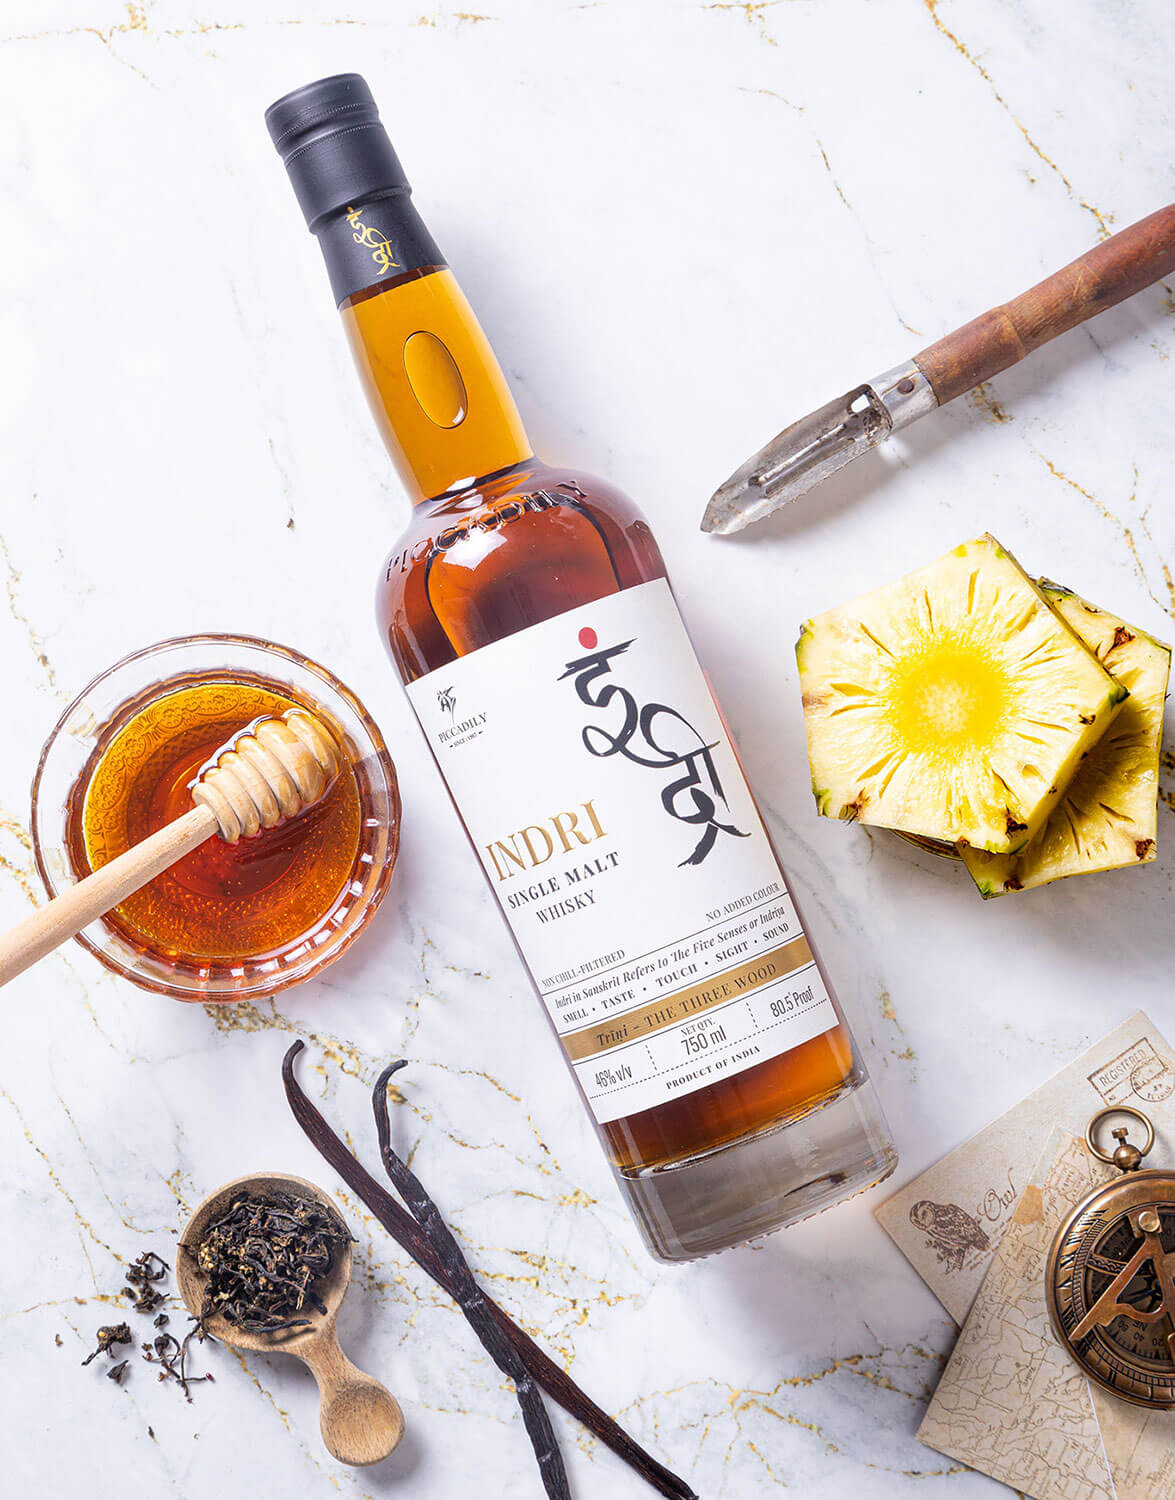 Indri Single Malt Whisky - From Piccadily